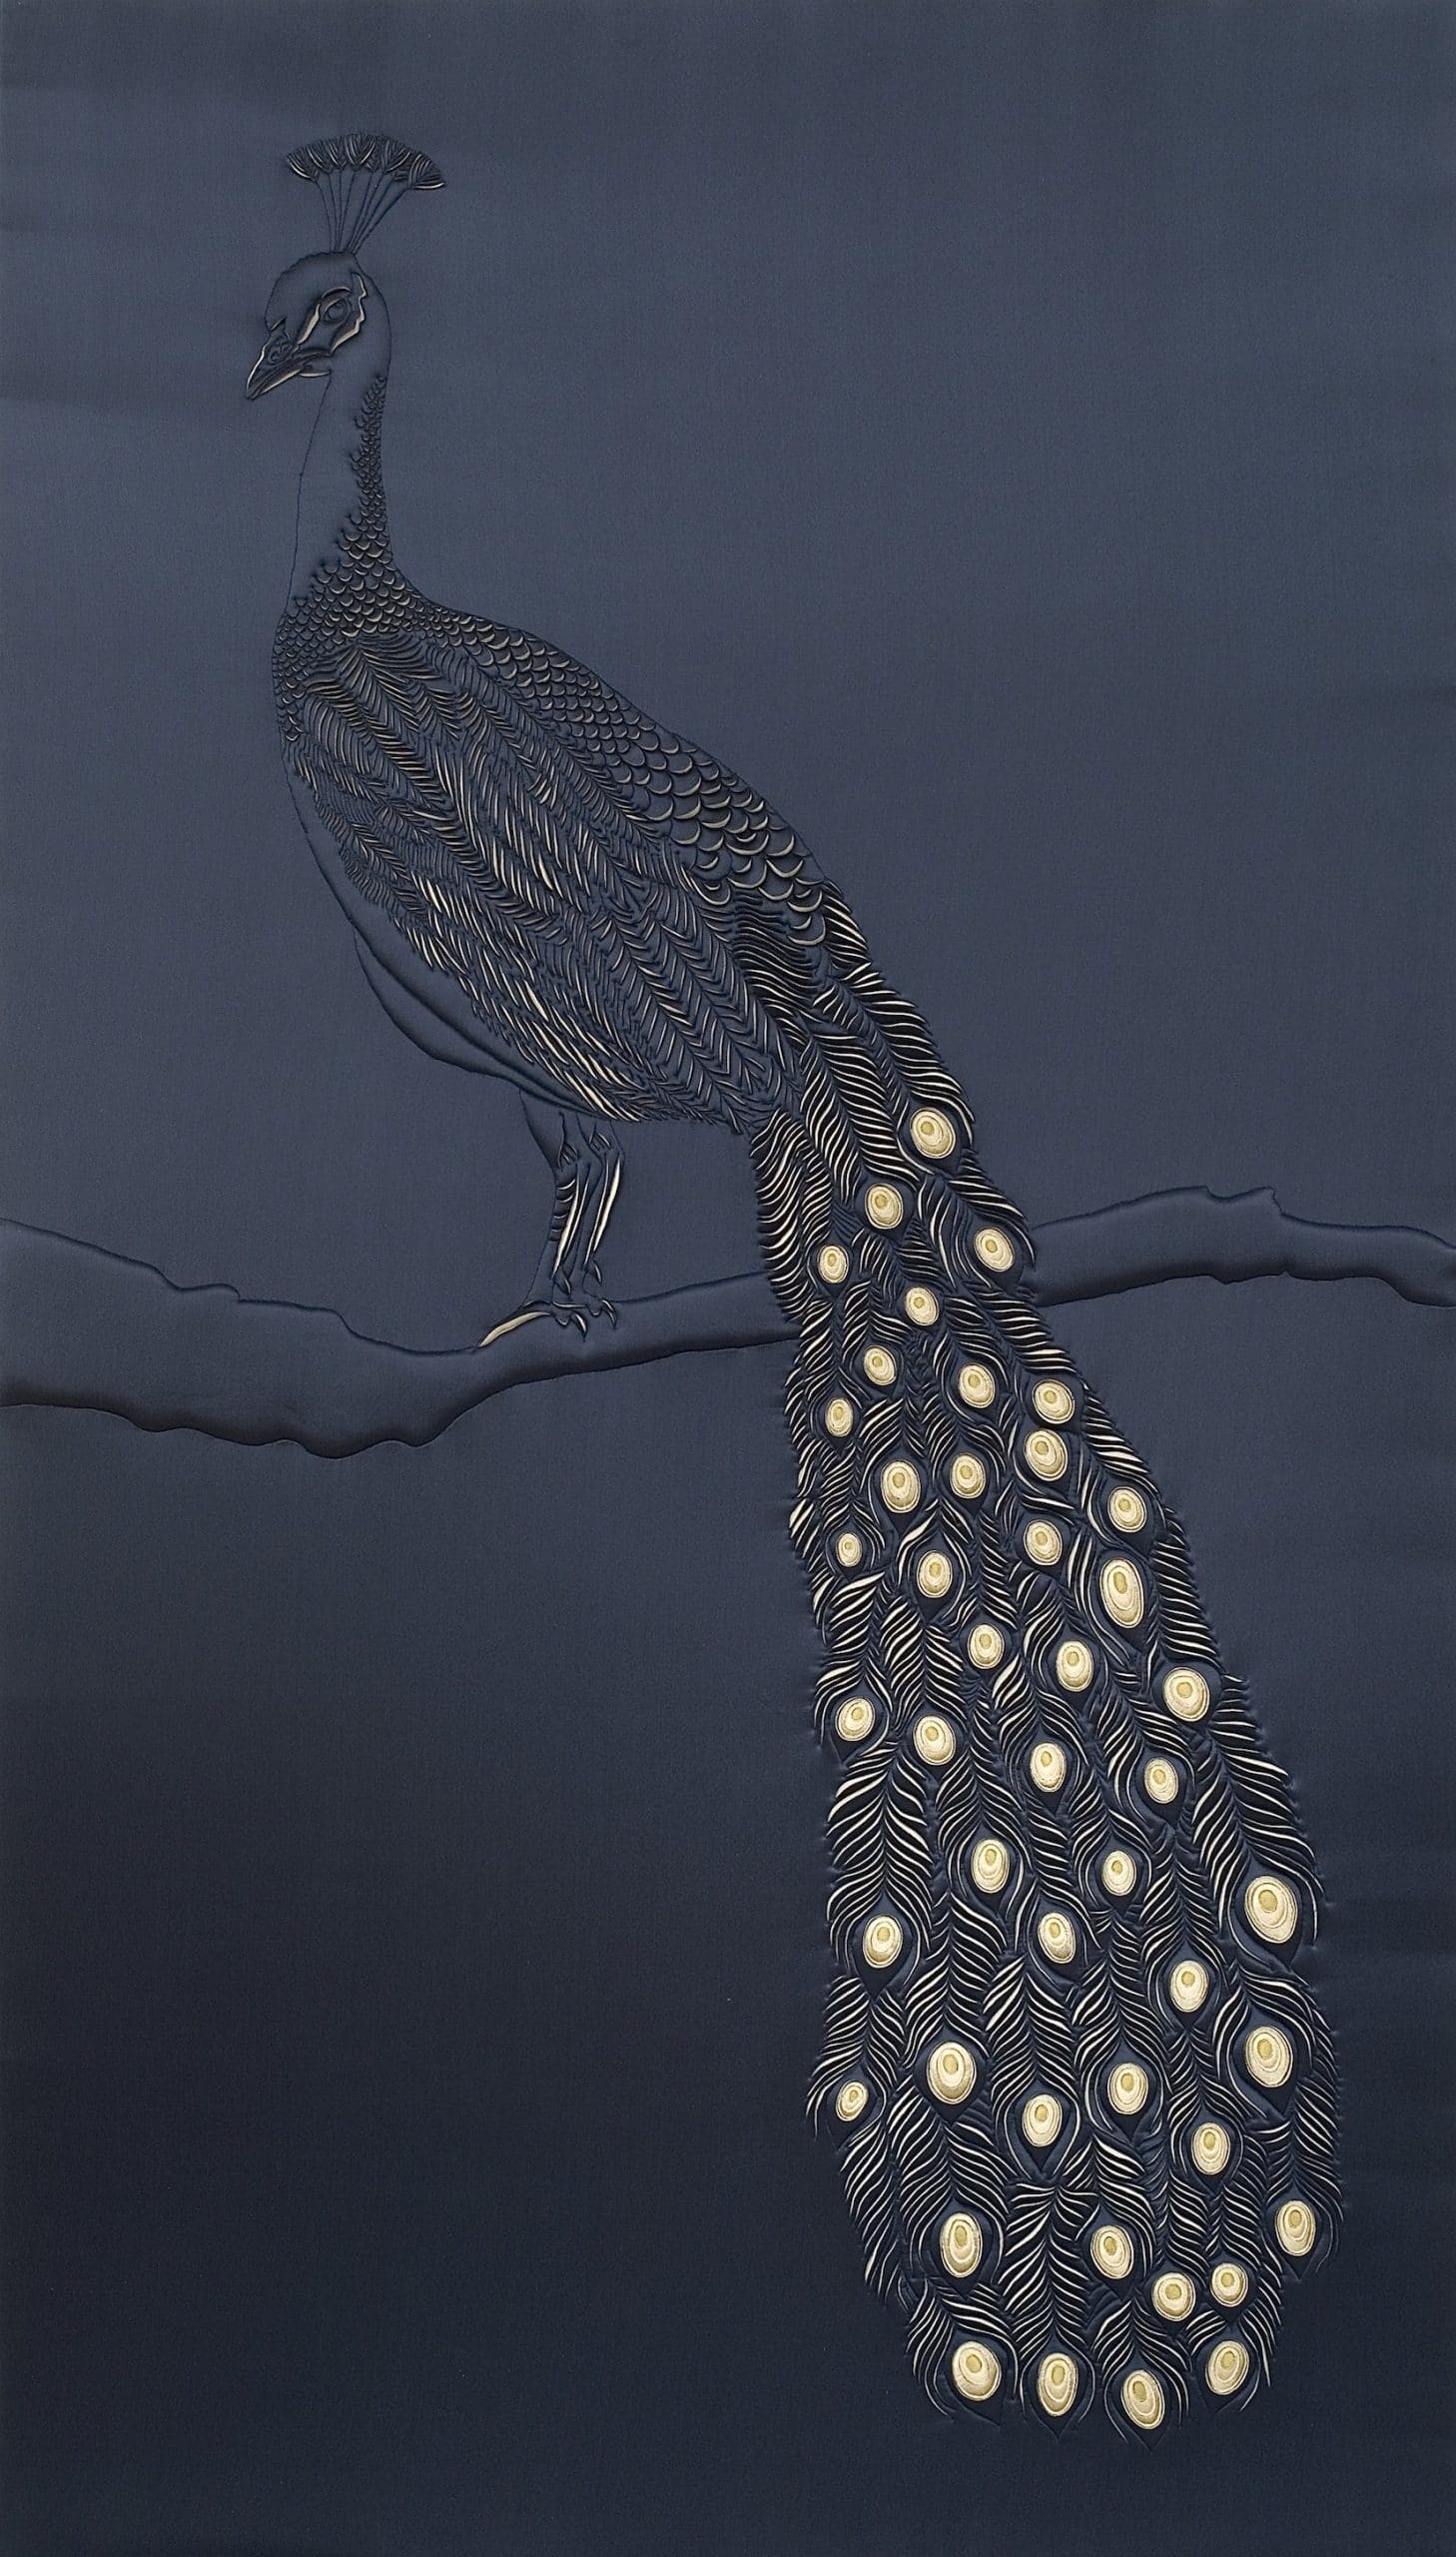 'Peacock', 2010. Navy silk crepe satin, gold Indian silk dupion applique and gold dyed foam. By Helen Amy Murray